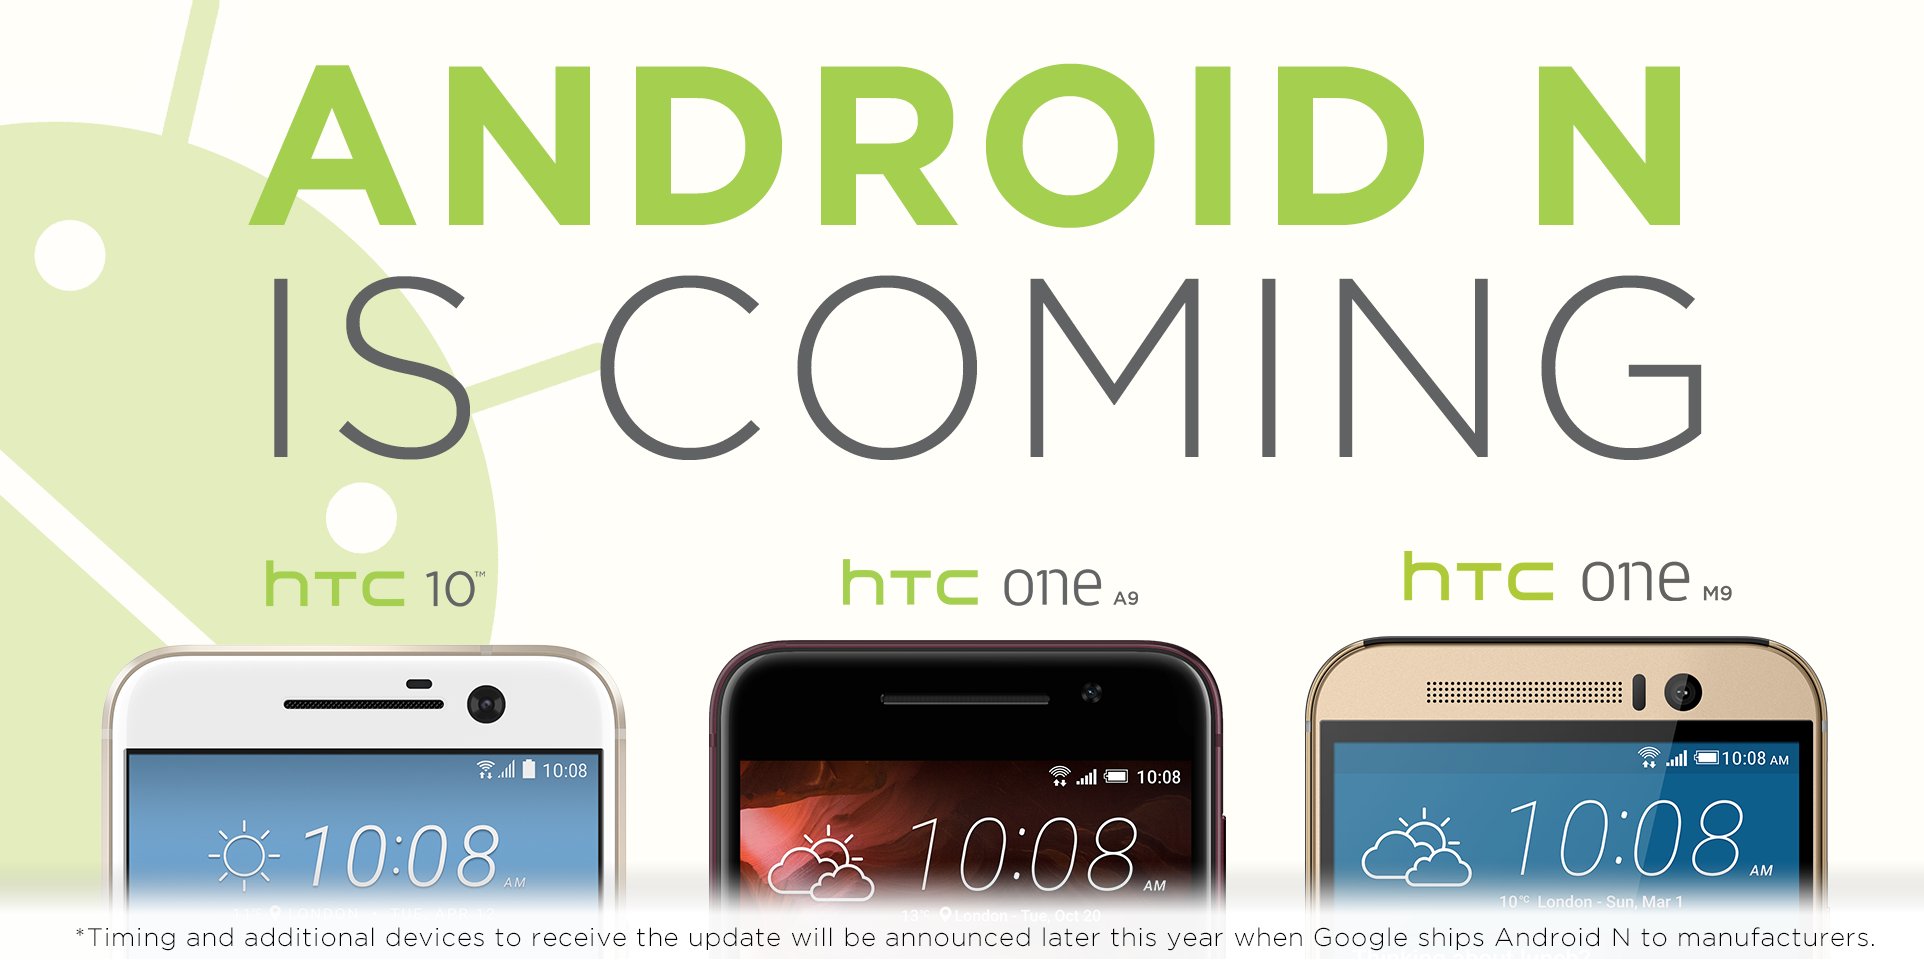 on Twitter: "Life is about to get a little Android N will be coming to the HTC 10, HTC One A9 and the HTC One M9. https://t.co/XzOEwTCVlU" /